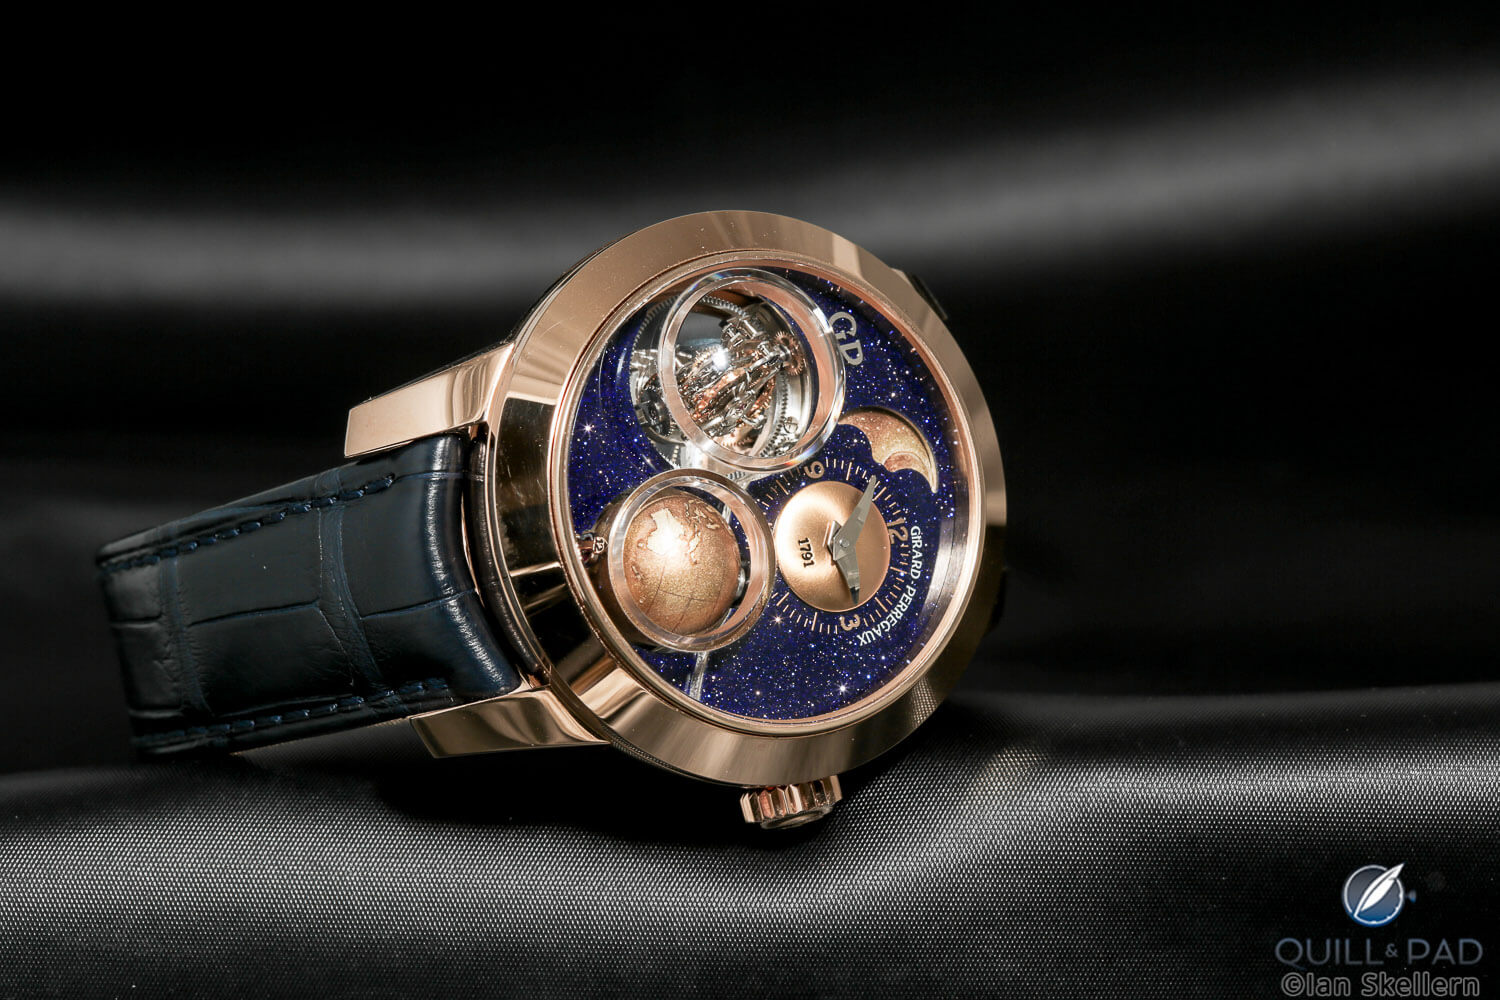 Girard-Perregaux introduced an aventurine-outfitted edition of its complicated Planetarium Tri-Axial at SIHH 2018